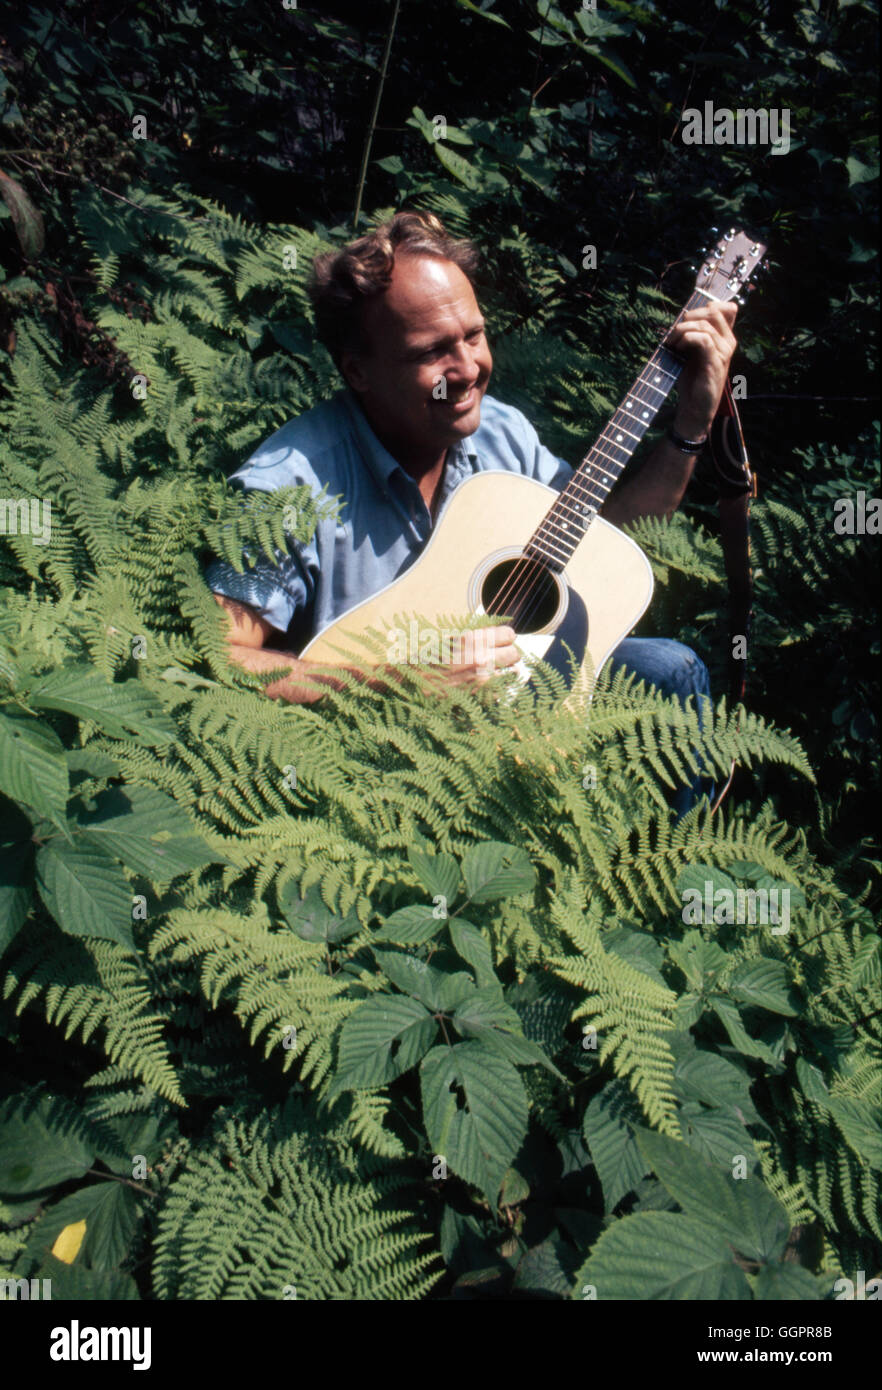 Author James Dickey, best known for his novel Deliverance, playing guitar  among dense foliage, June 23, 1969 Stock Photo - Alamy